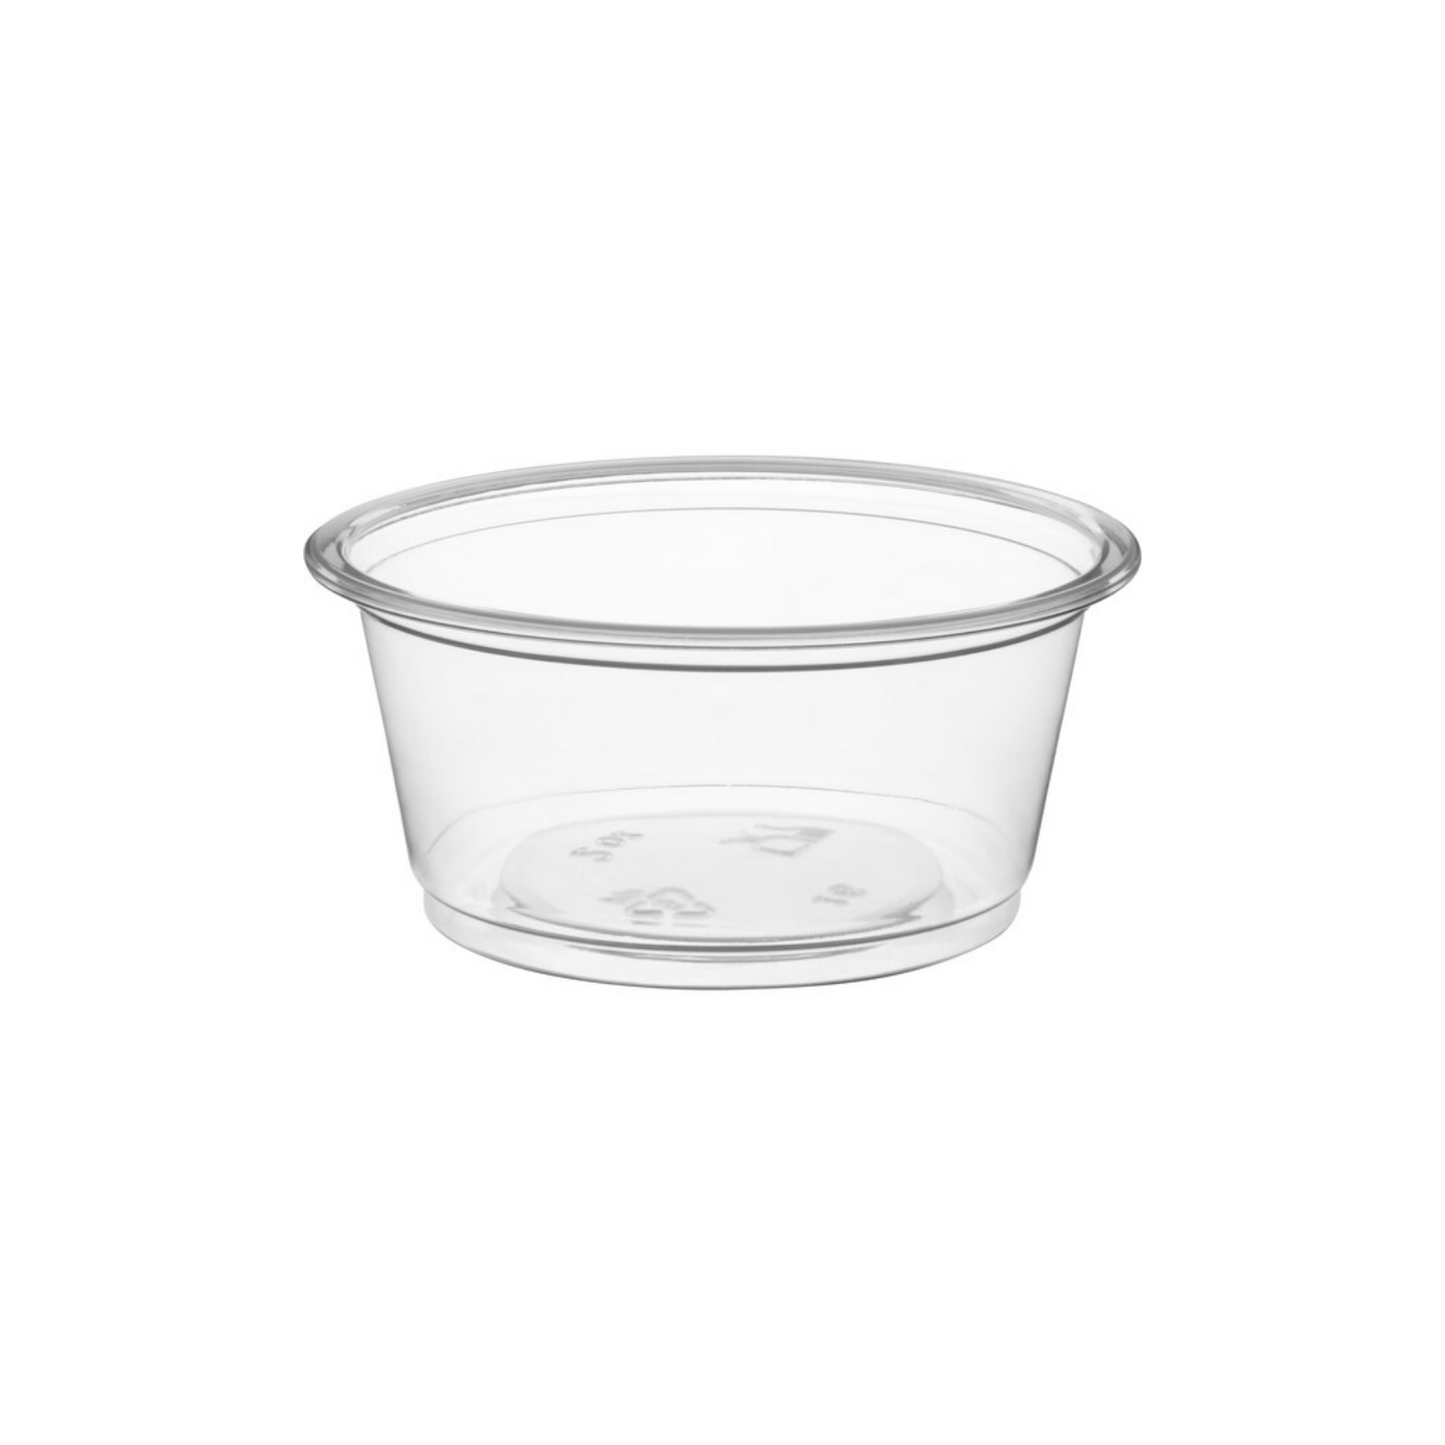 2 oz Clear Portion Cups